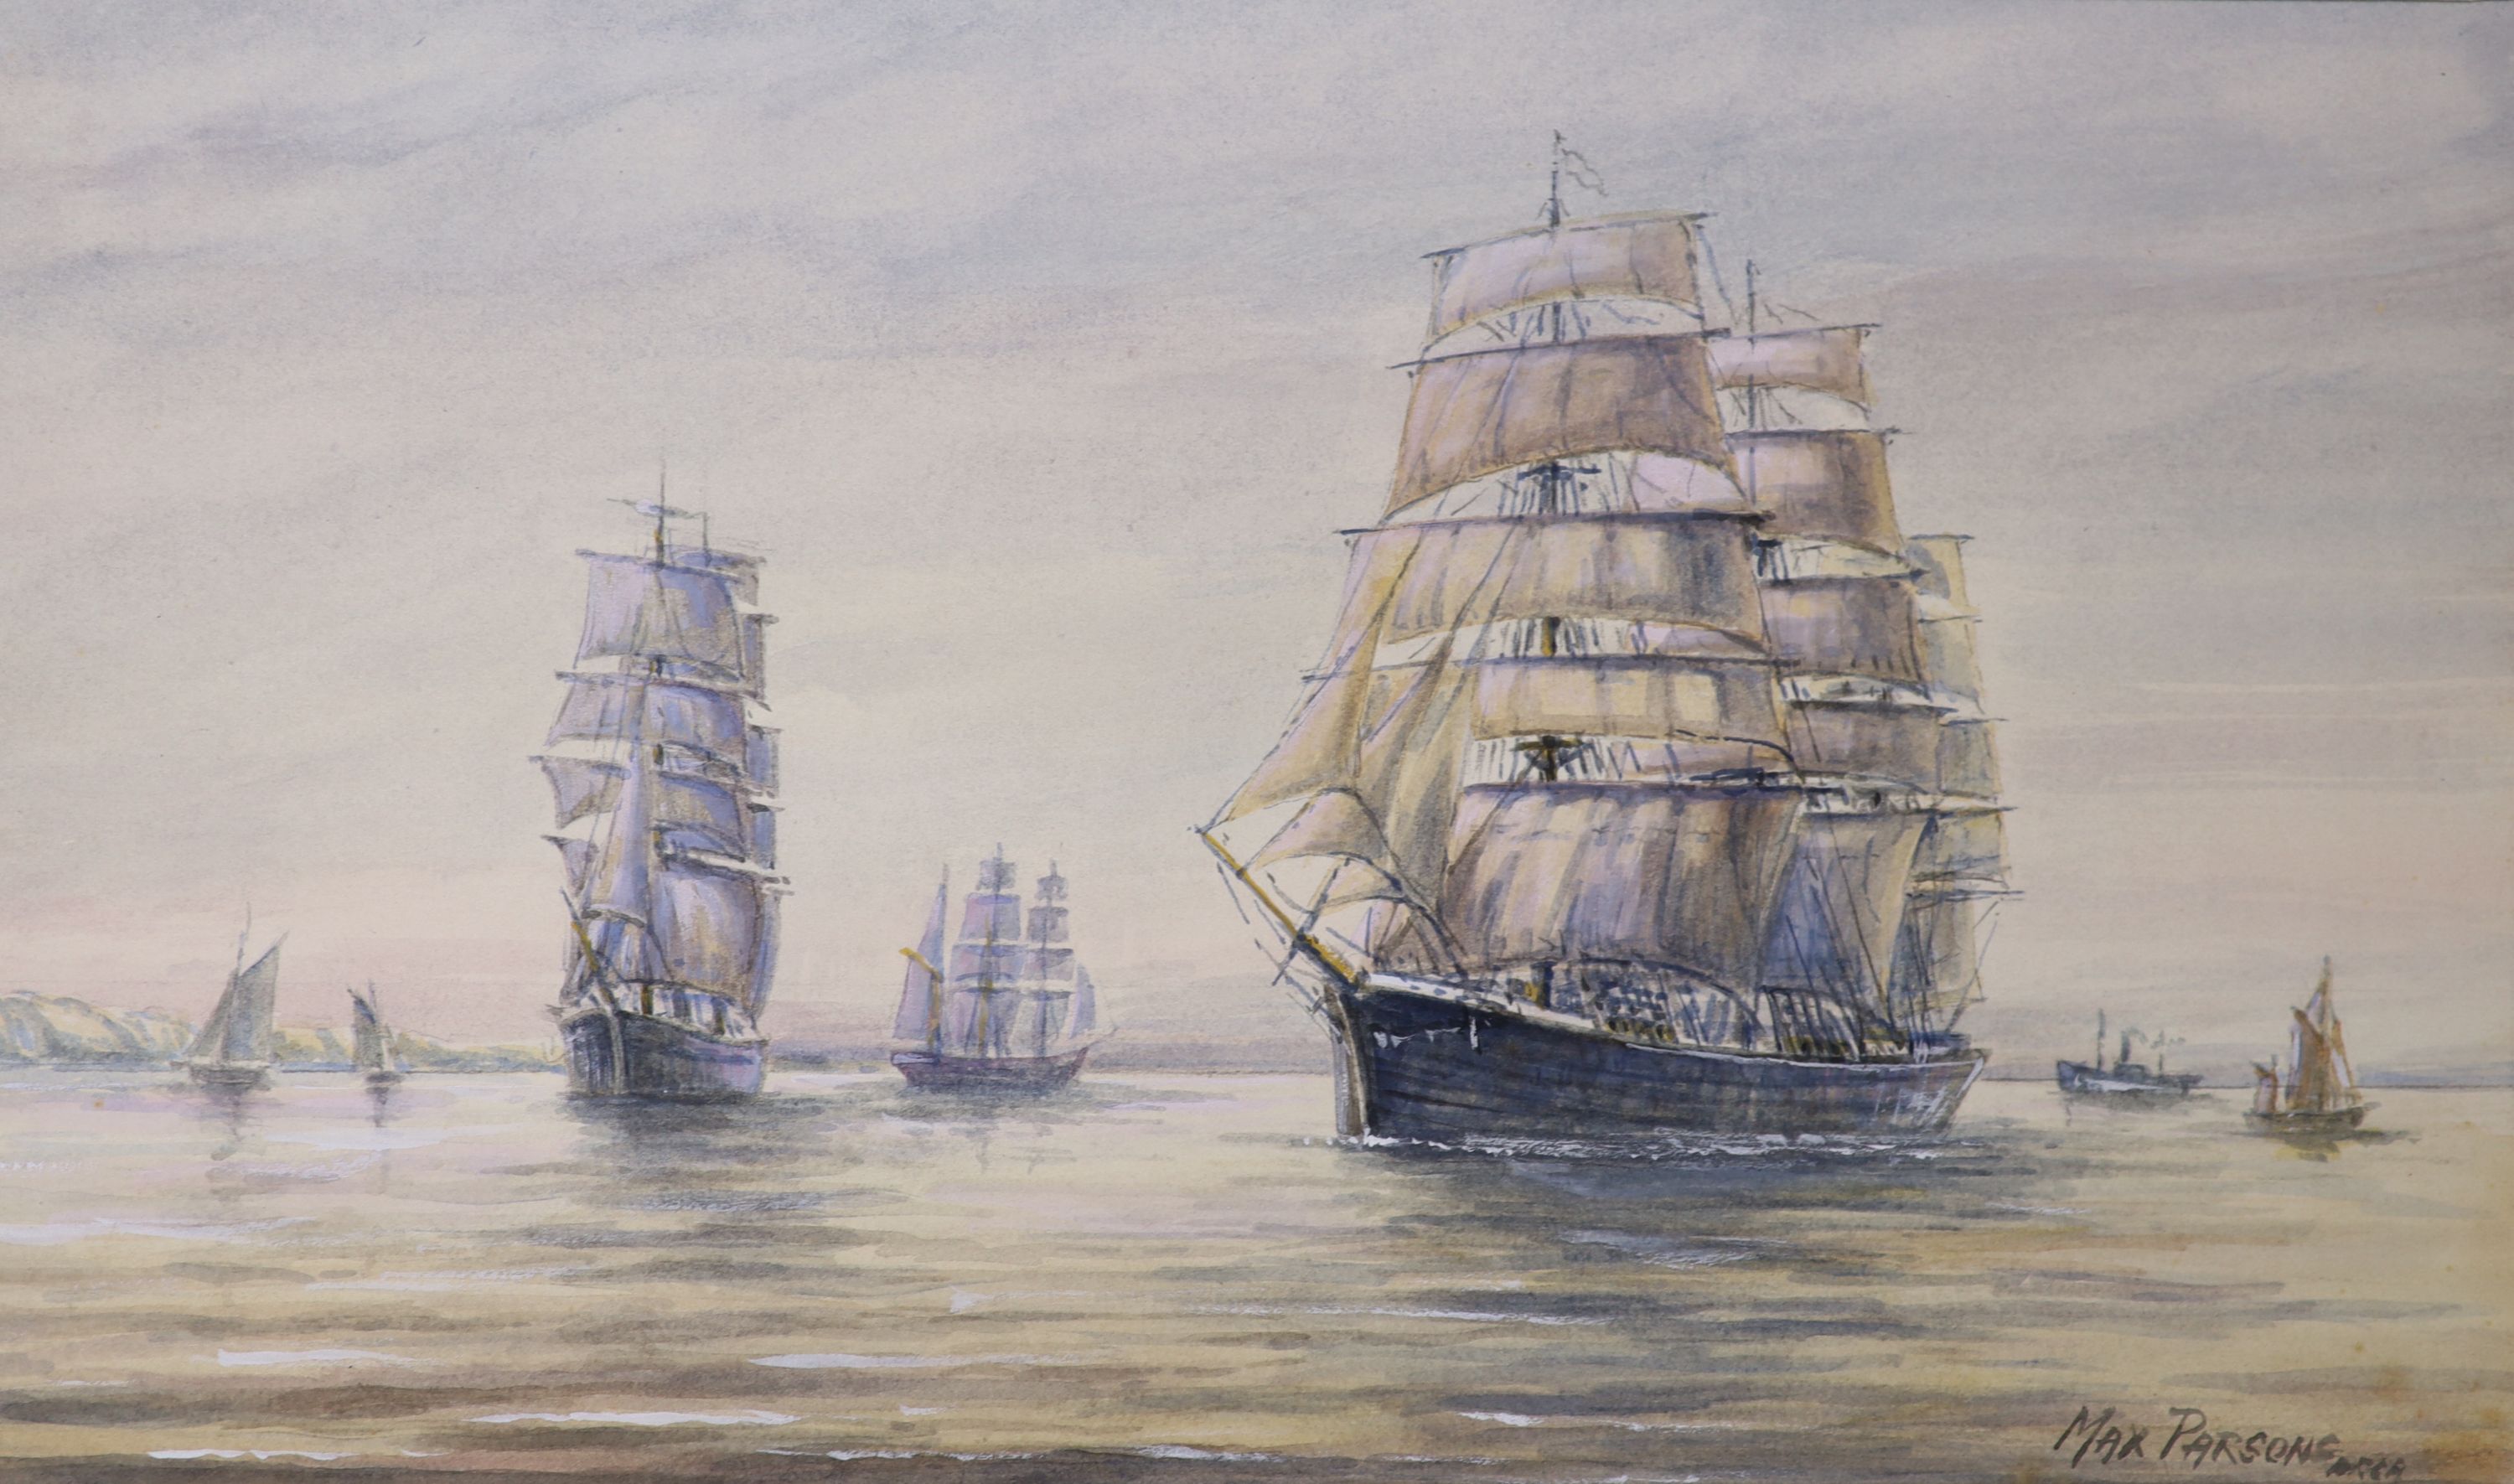 Max Parsons A.R.C.A. (1915-1998), a group of five watercolour drawings of sailing clippers and other vessels at sea, some signed, one dated 1982, unframed, 37 x 28cm (largest)